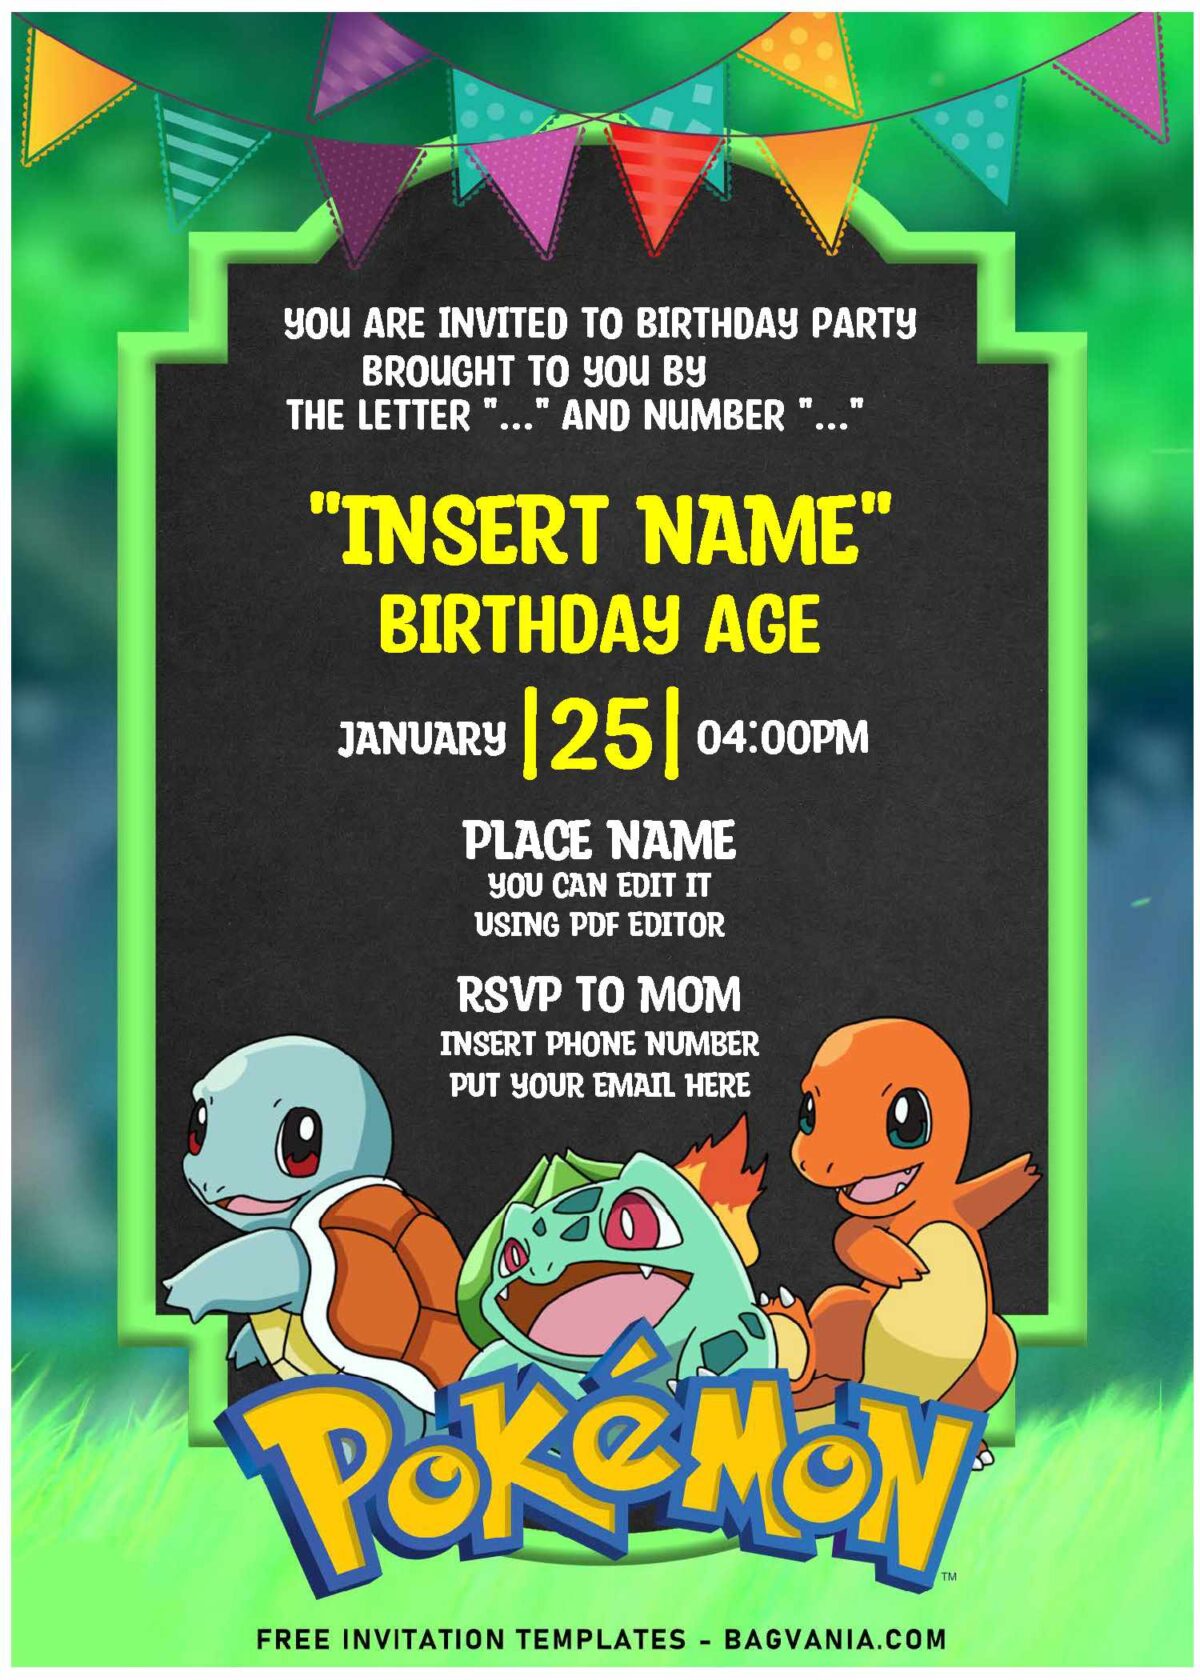 (Free Editable PDF) Hilarious Pikachu And Friends Pokémon Birthday Invitation Templates with adorable Charmander and Squirtle